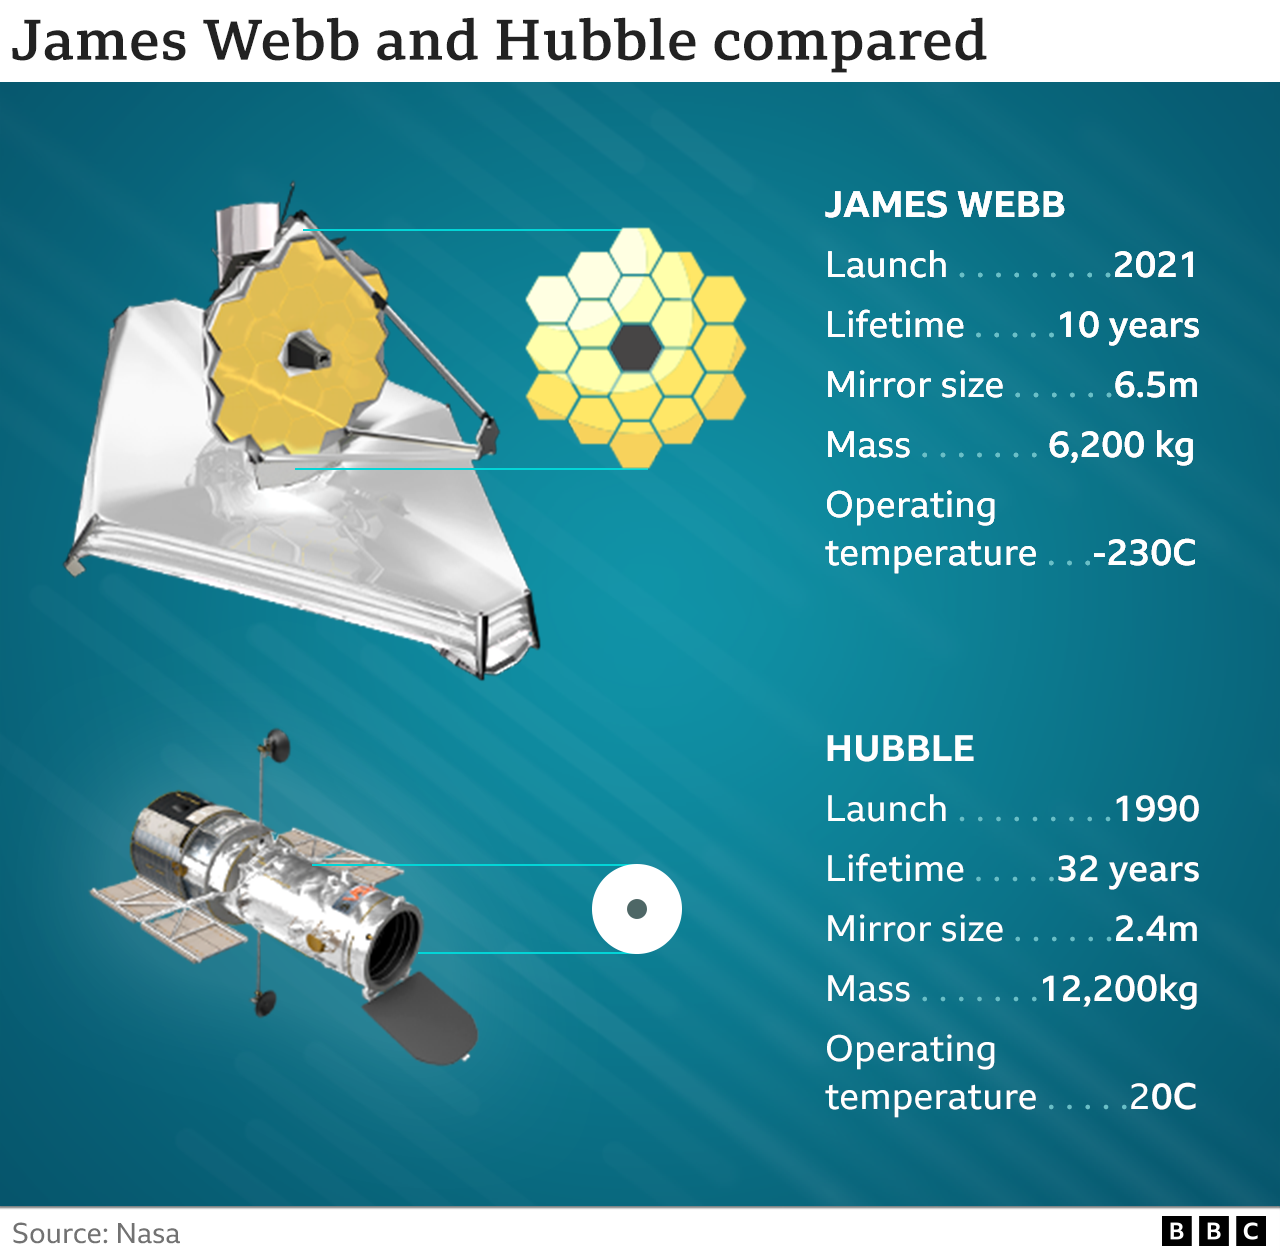 Webb and Hubble